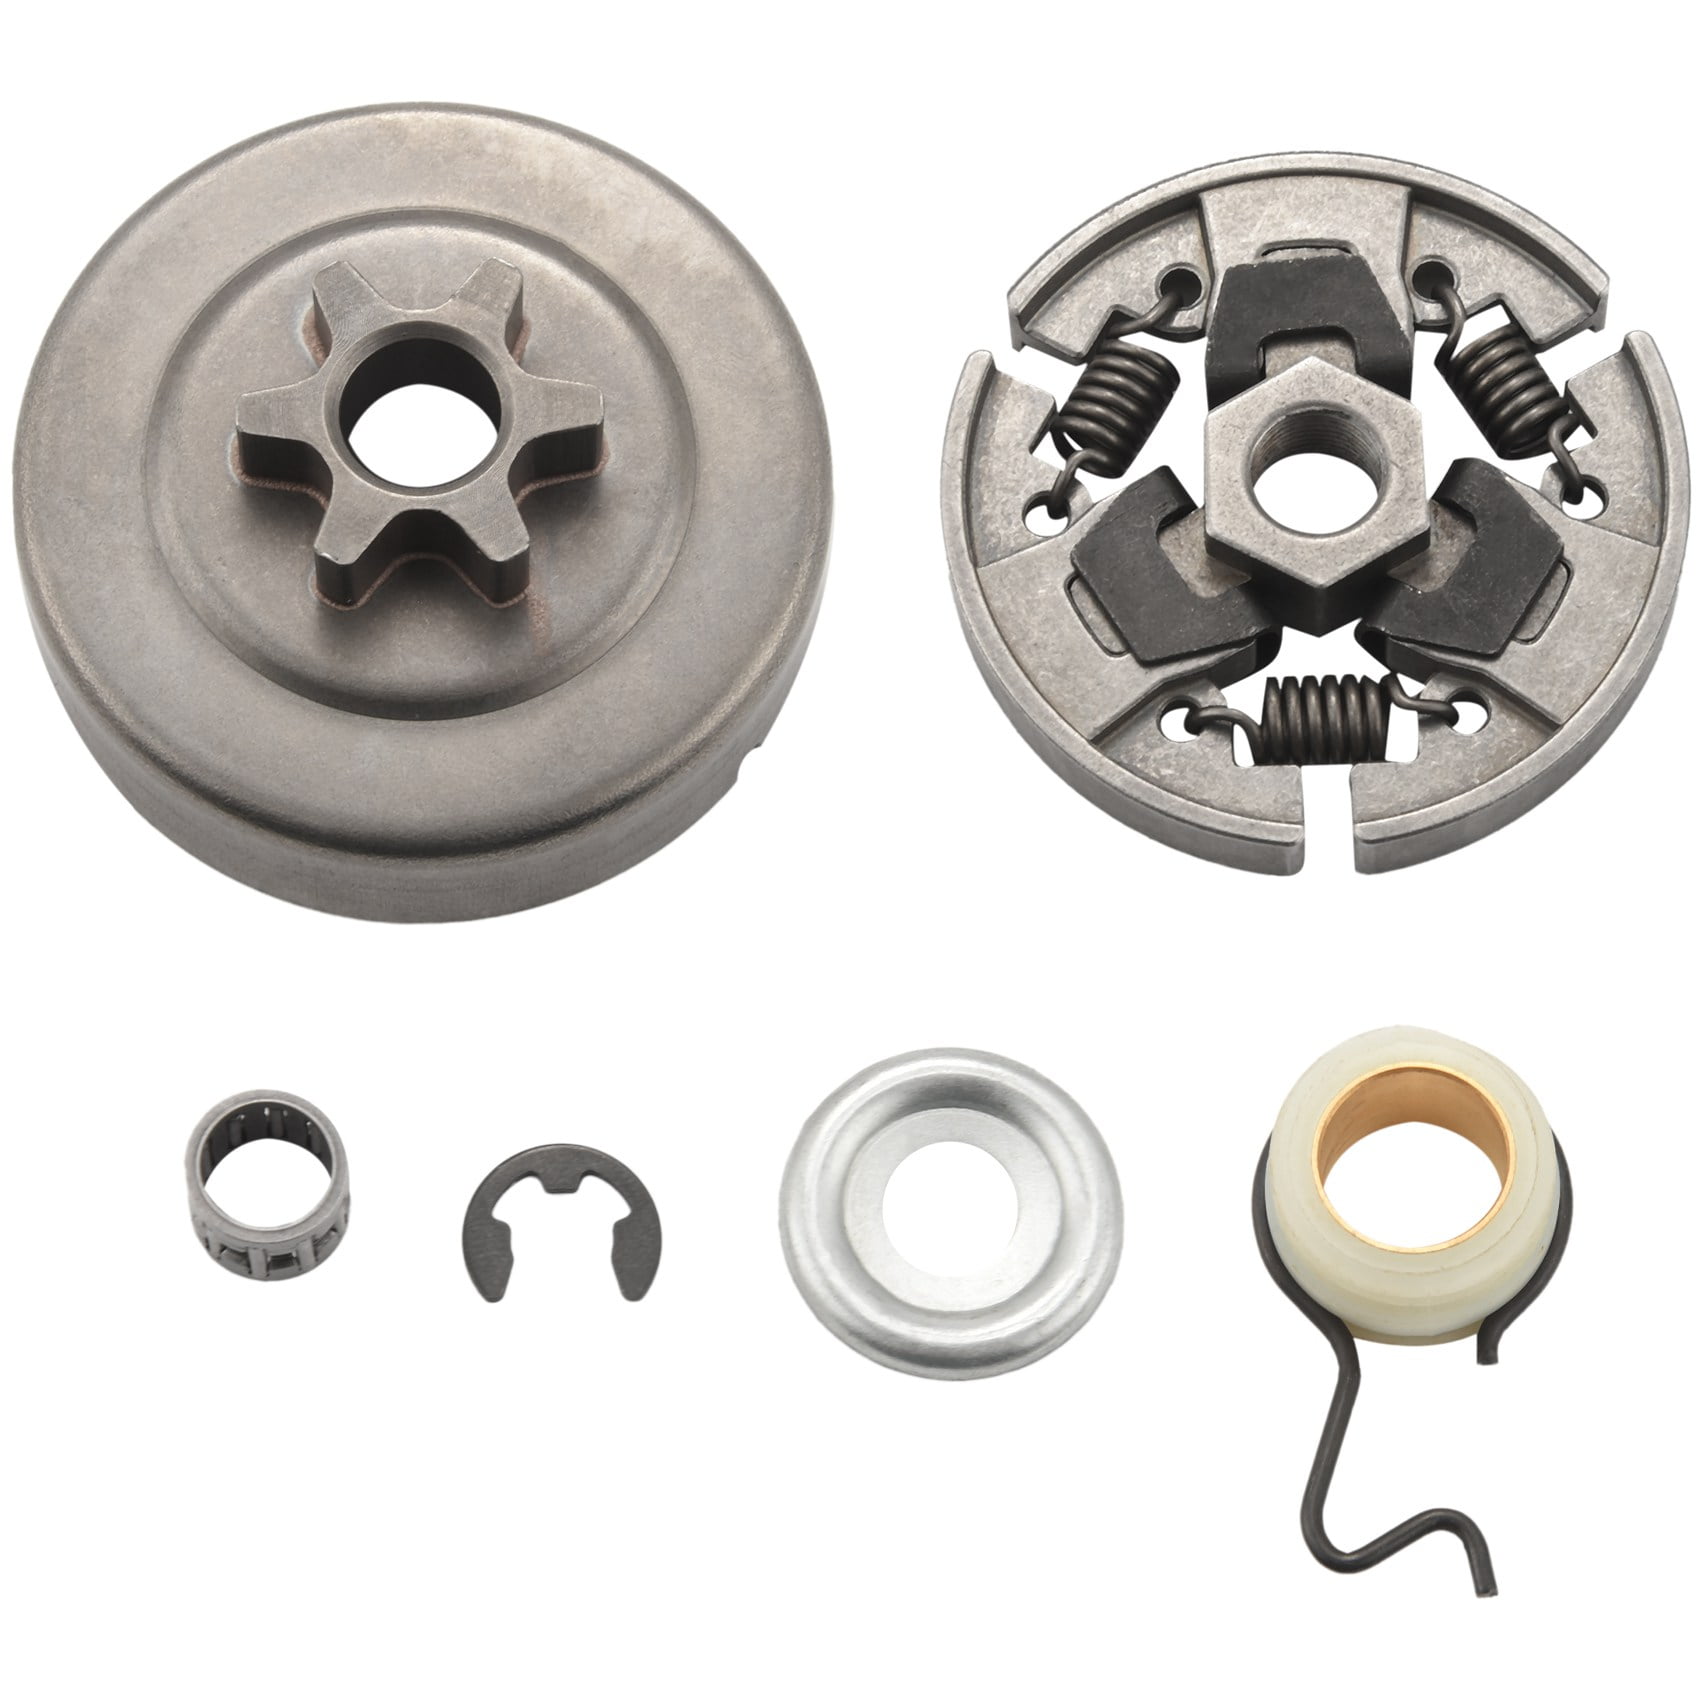 Replaces 1123 640 2003 1123 640 2073 BlueStars Wear-Resistant MS250 Sprocket Clutch Kit with Washer E-Clip Compatible with Stihl 017 018 021 023 025 MS170 MS180 MS210 MS230 Chainsaw and More 